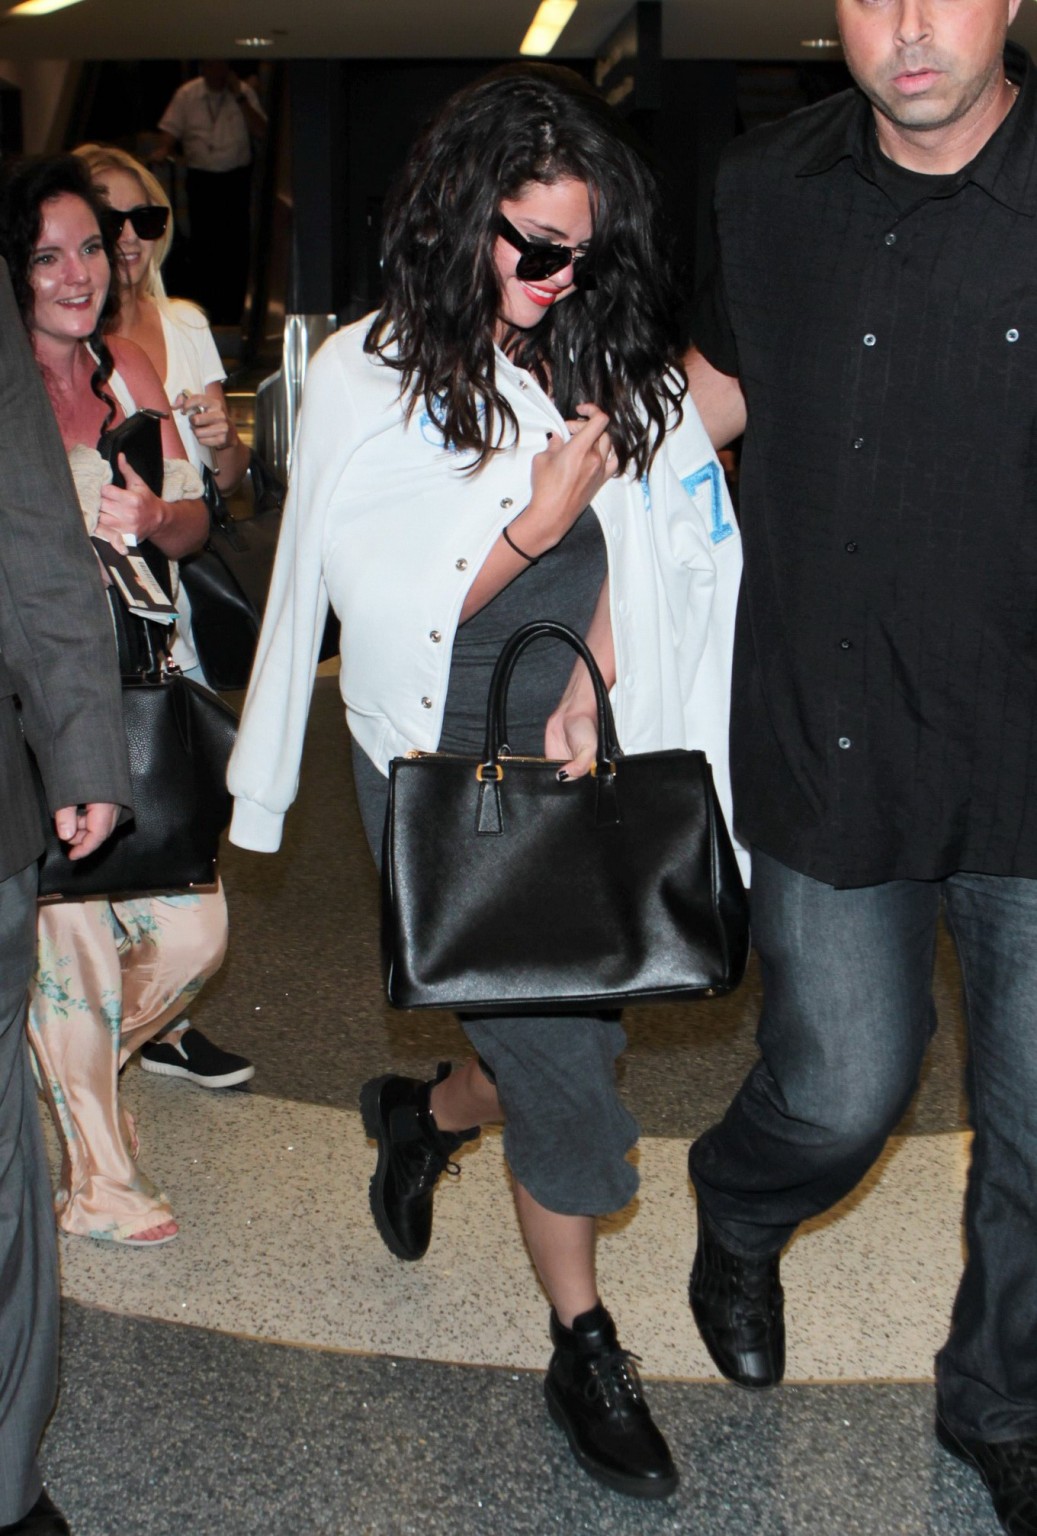 Selena Gomez busty wearing a low cut dress at LAX Airport #75166567